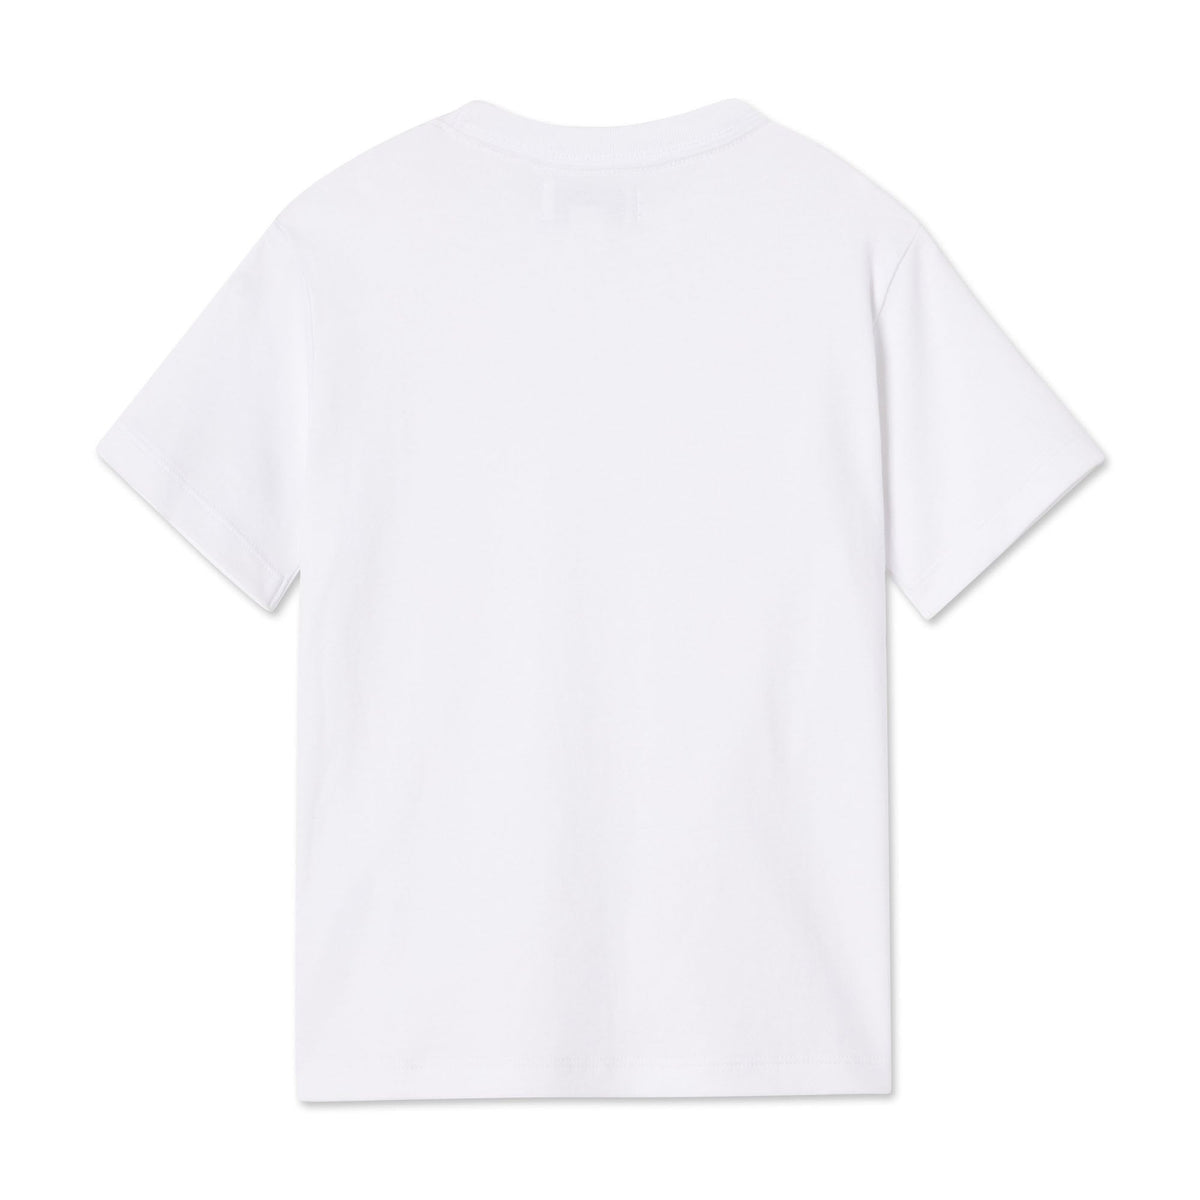 Classic and Preppy Kellan Short Sleeve Pocket Tee, Bright White-Shirts and Tops-CPC - Classic Prep Childrenswear